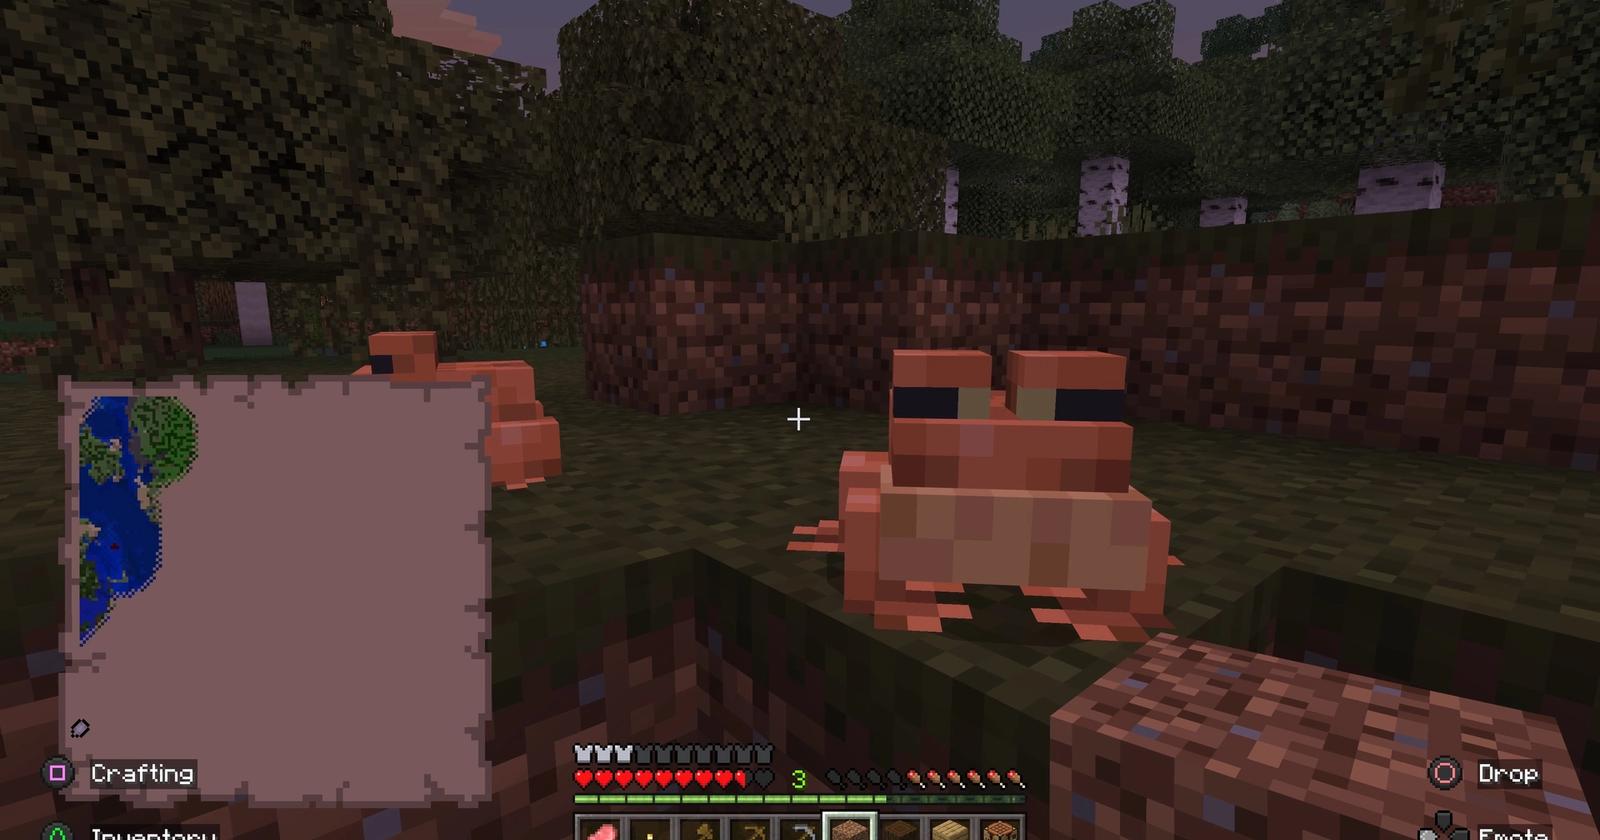 Frogspotting, Mods are asleep! Quick, explain which minecraft frog is  better